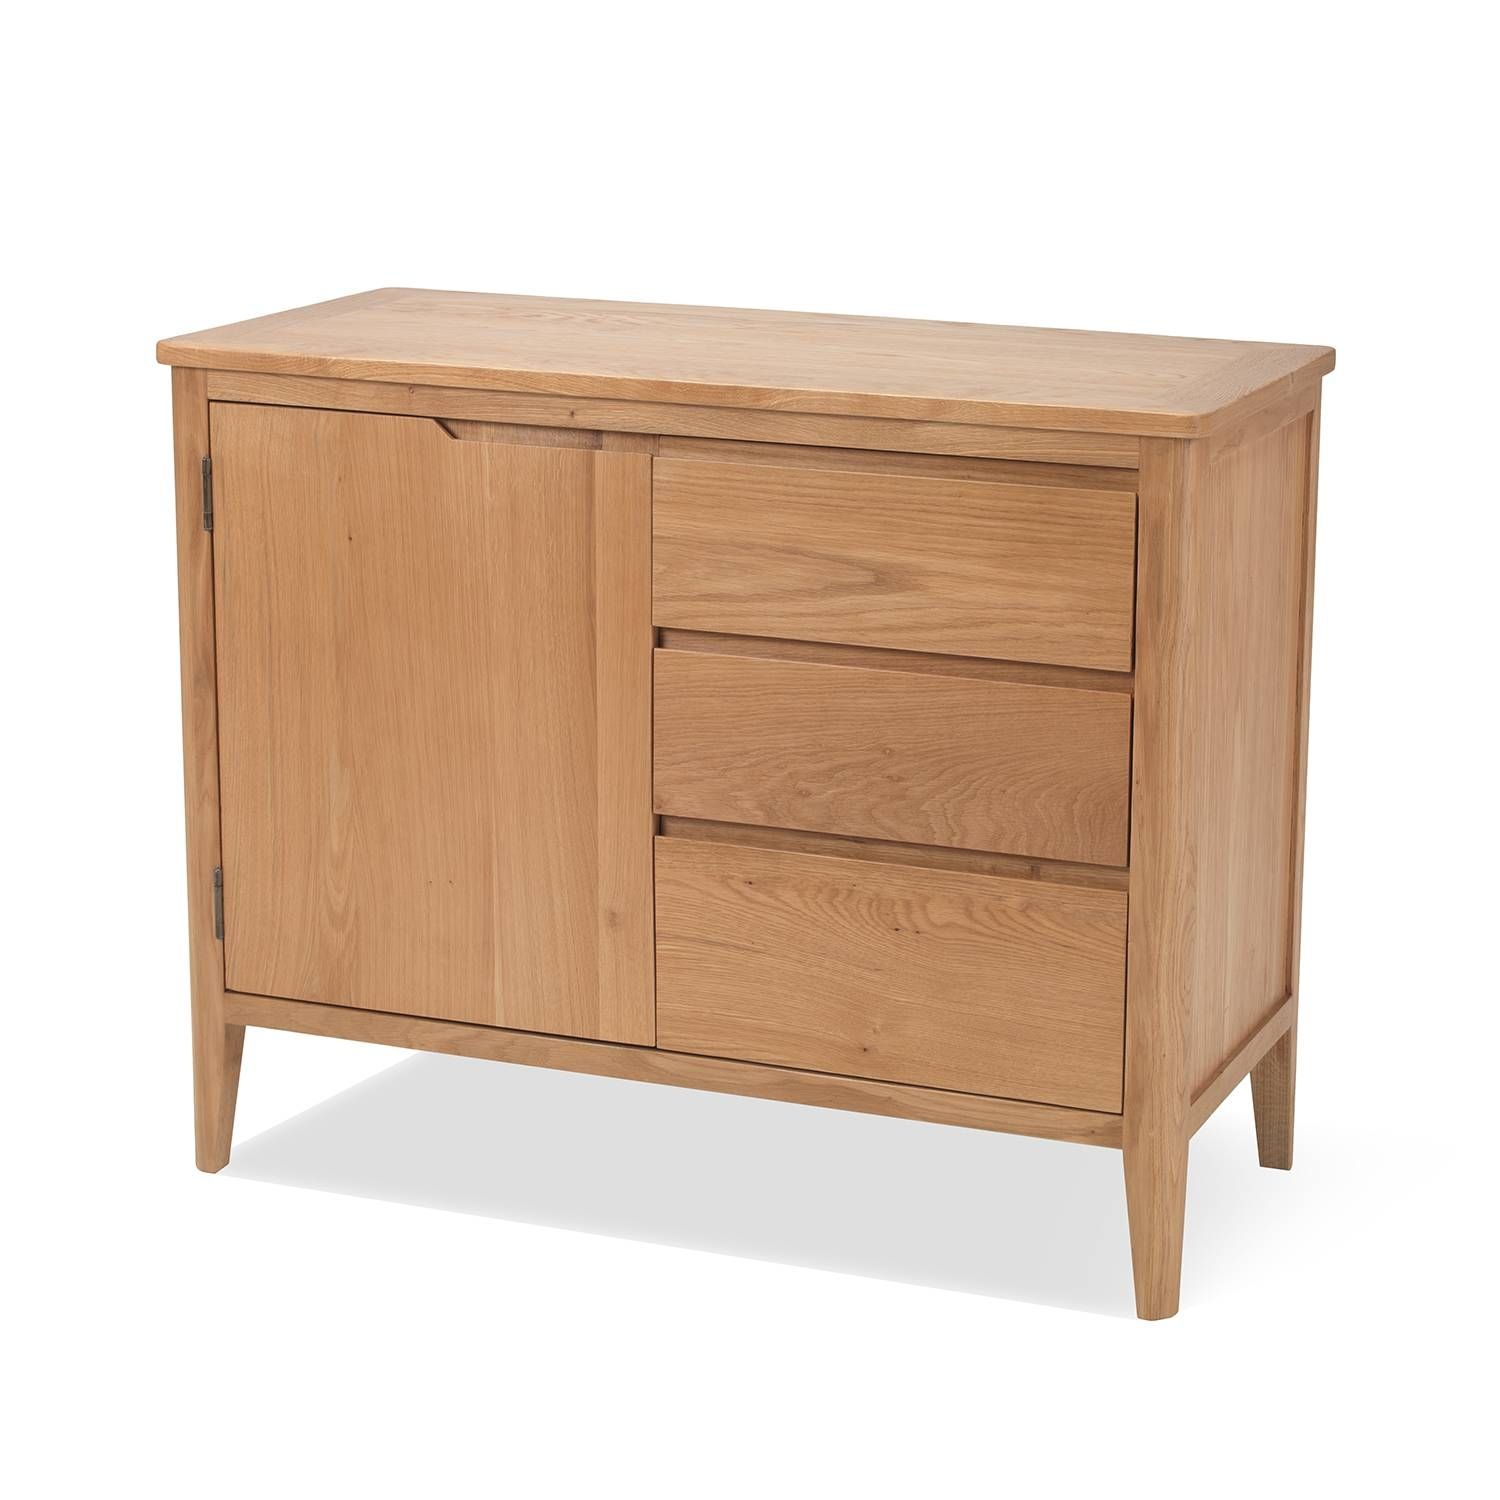 Oslo – Small Oak Sideboard / 1 Door 3 Drawer Storage Cupboard Unit With Regard To Small Sideboards With Drawers (View 3 of 15)